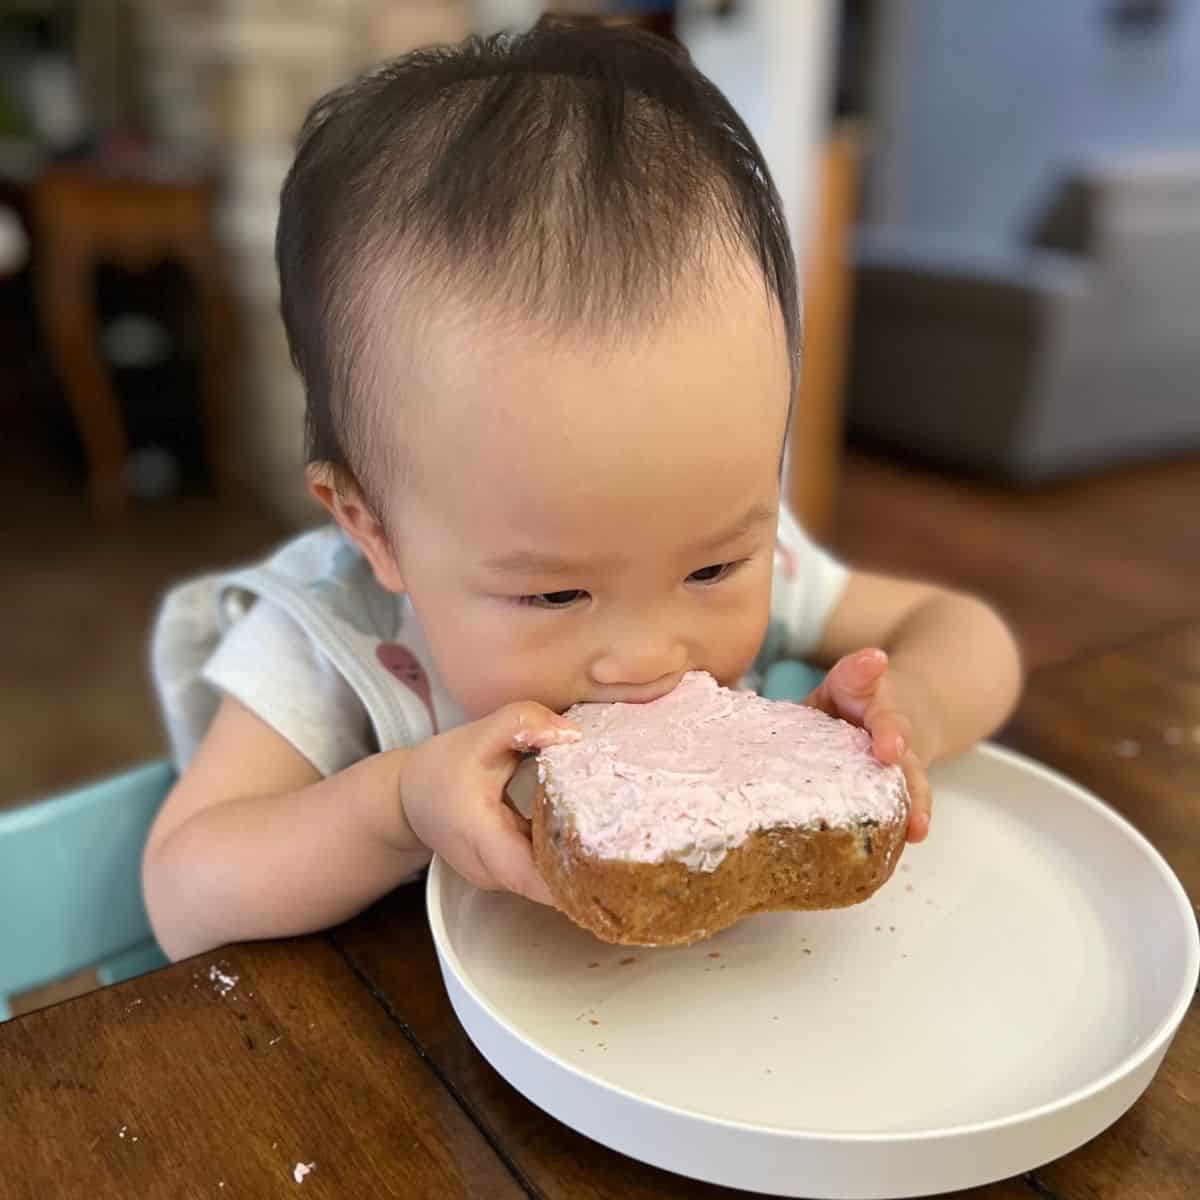 baby biting into a whole layer of cake.